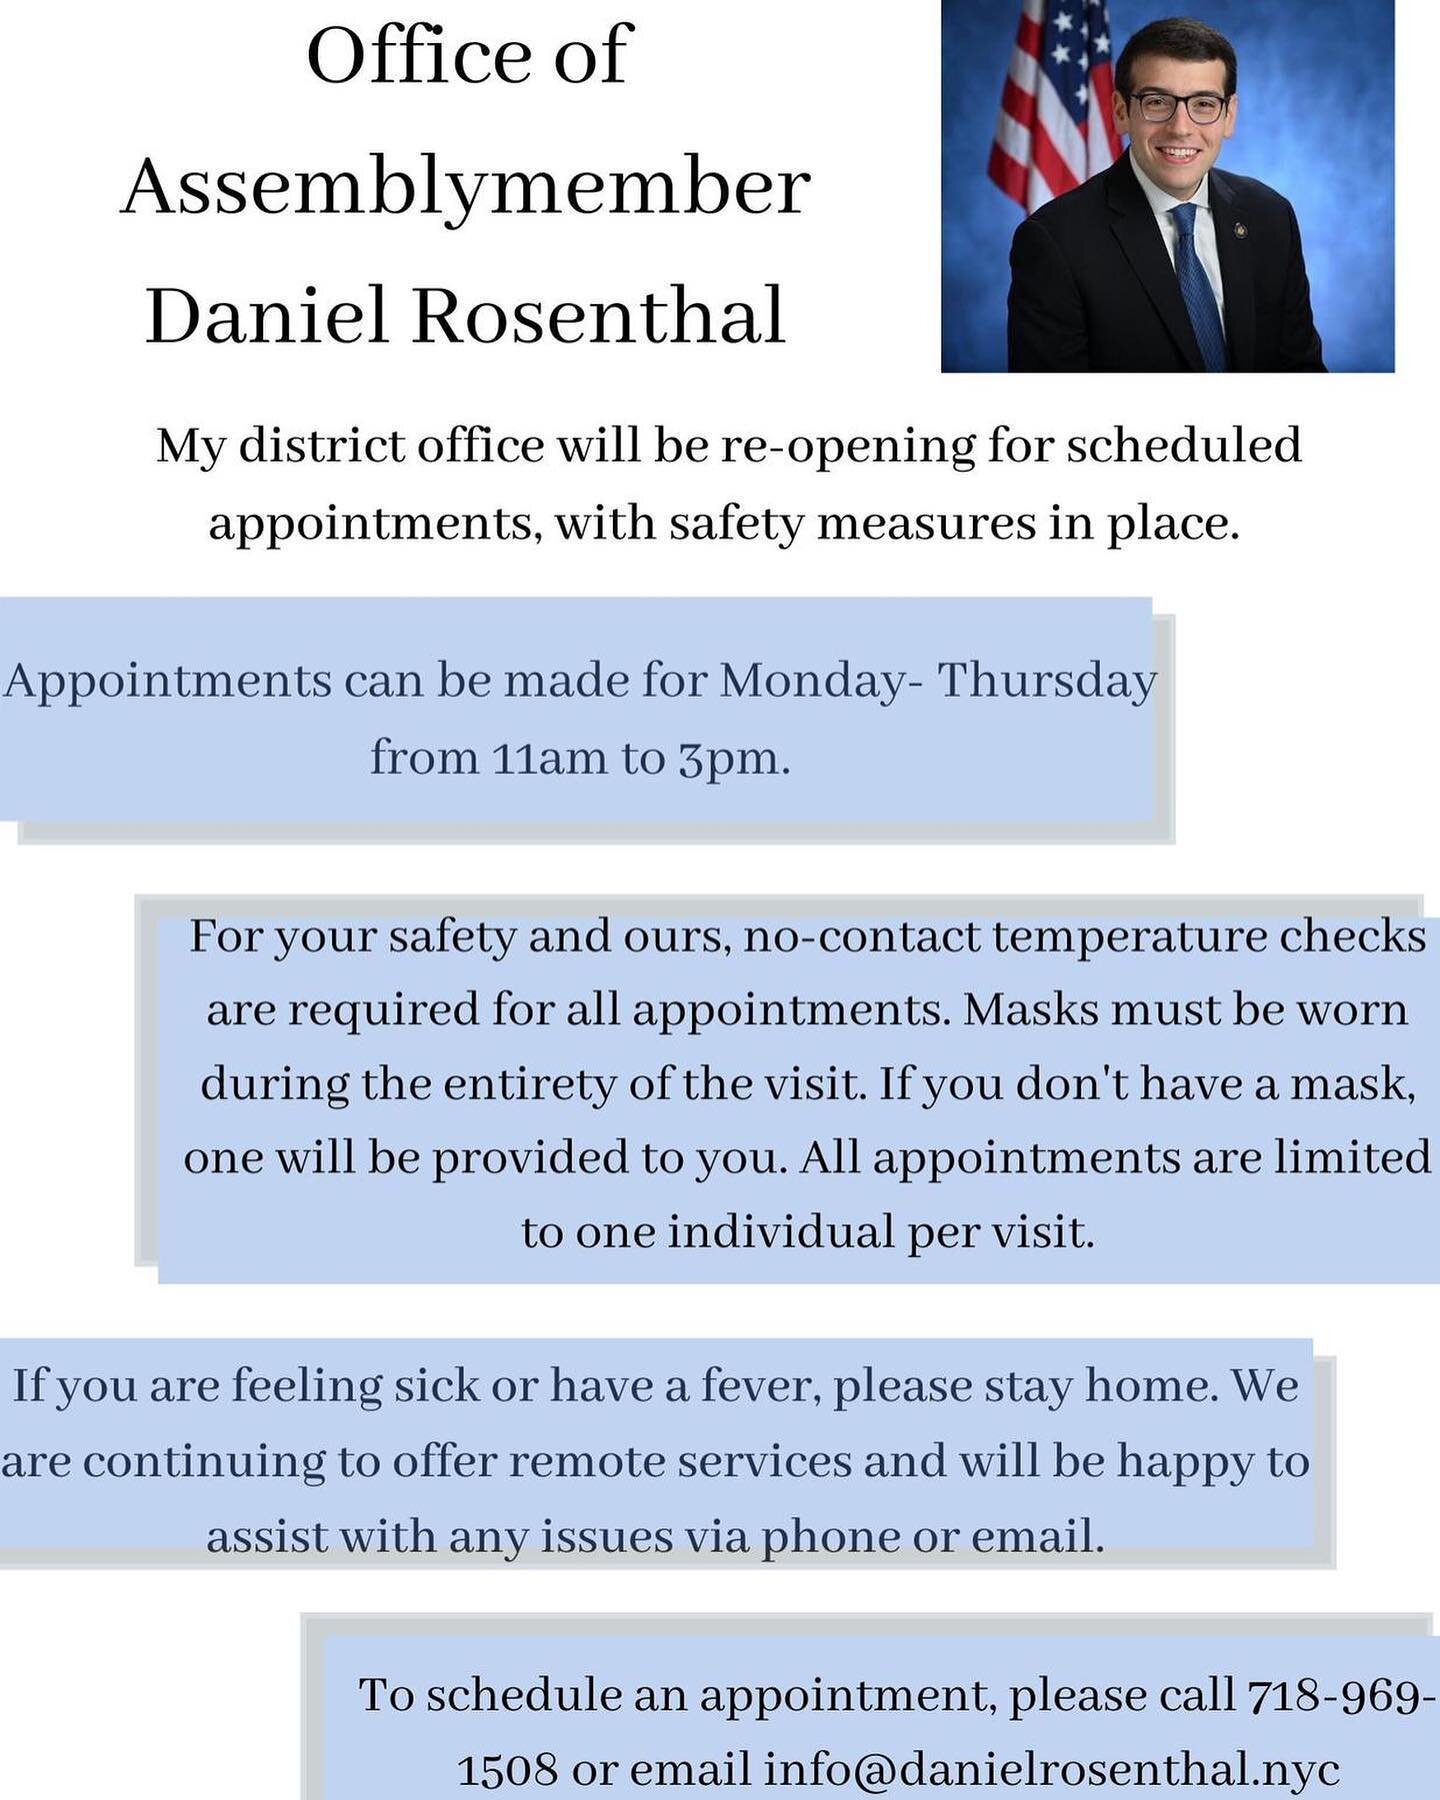 I&rsquo;m excited to announce that my office is re-opening for scheduled appointments. We will schedule appointments on a limited basis and continue to offer remote constituent services. Please see the flyer below for more details.